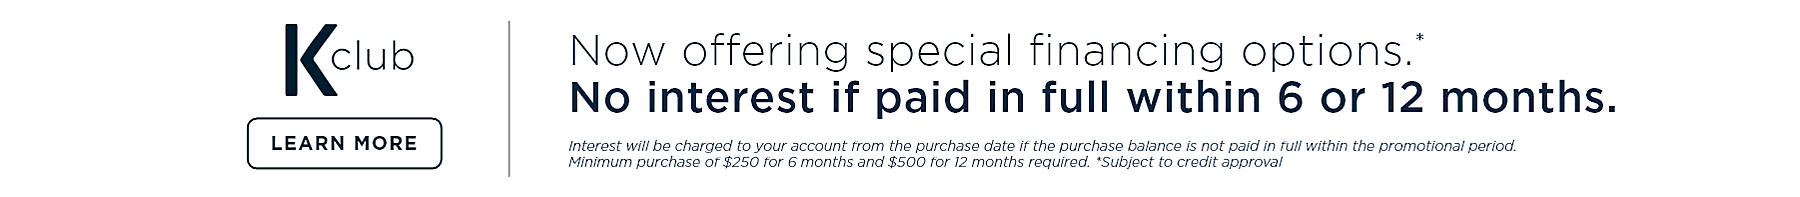 K-club Now offering special financing options.* No interest if paid in full within 6 or 12 months. Interest will be charged to your account from the purchase date if the purchase balance is not paid in full within the promotional period. Minimum purchase of $250 for 6 months and $500 for 12 months required. *Subject to credit approval. Learn more